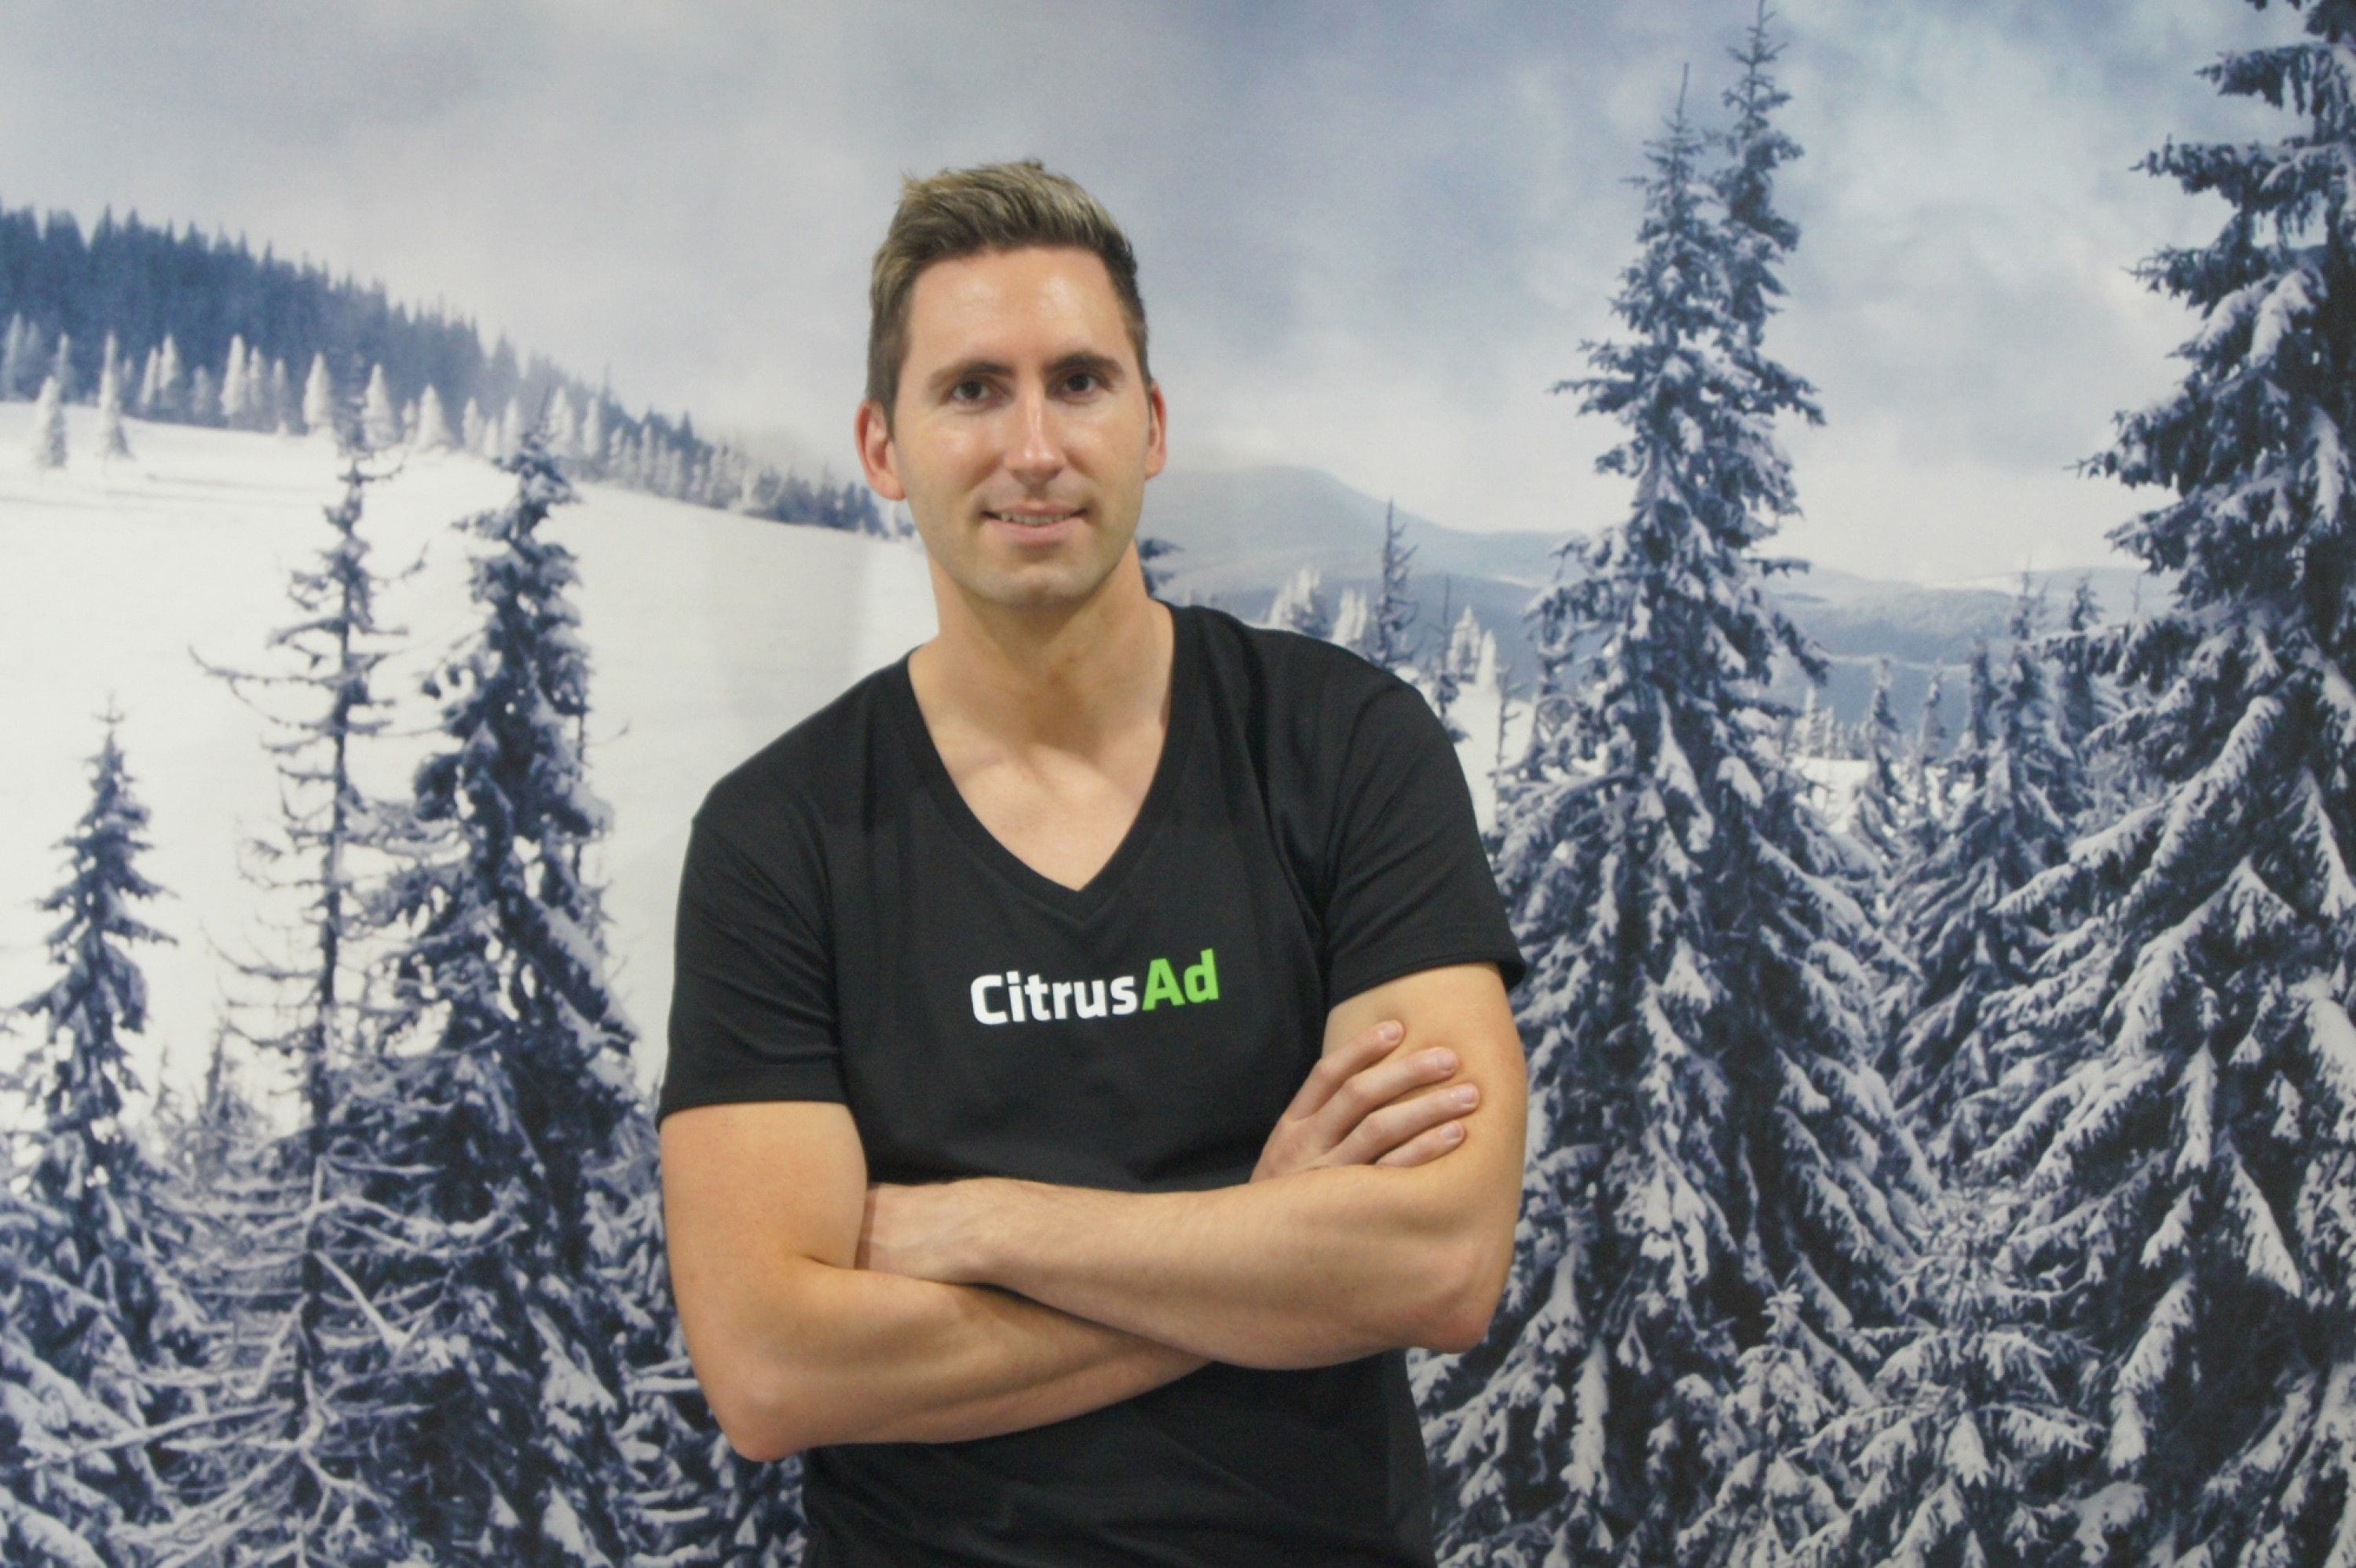 CitrusAd hits the Target with new partnership